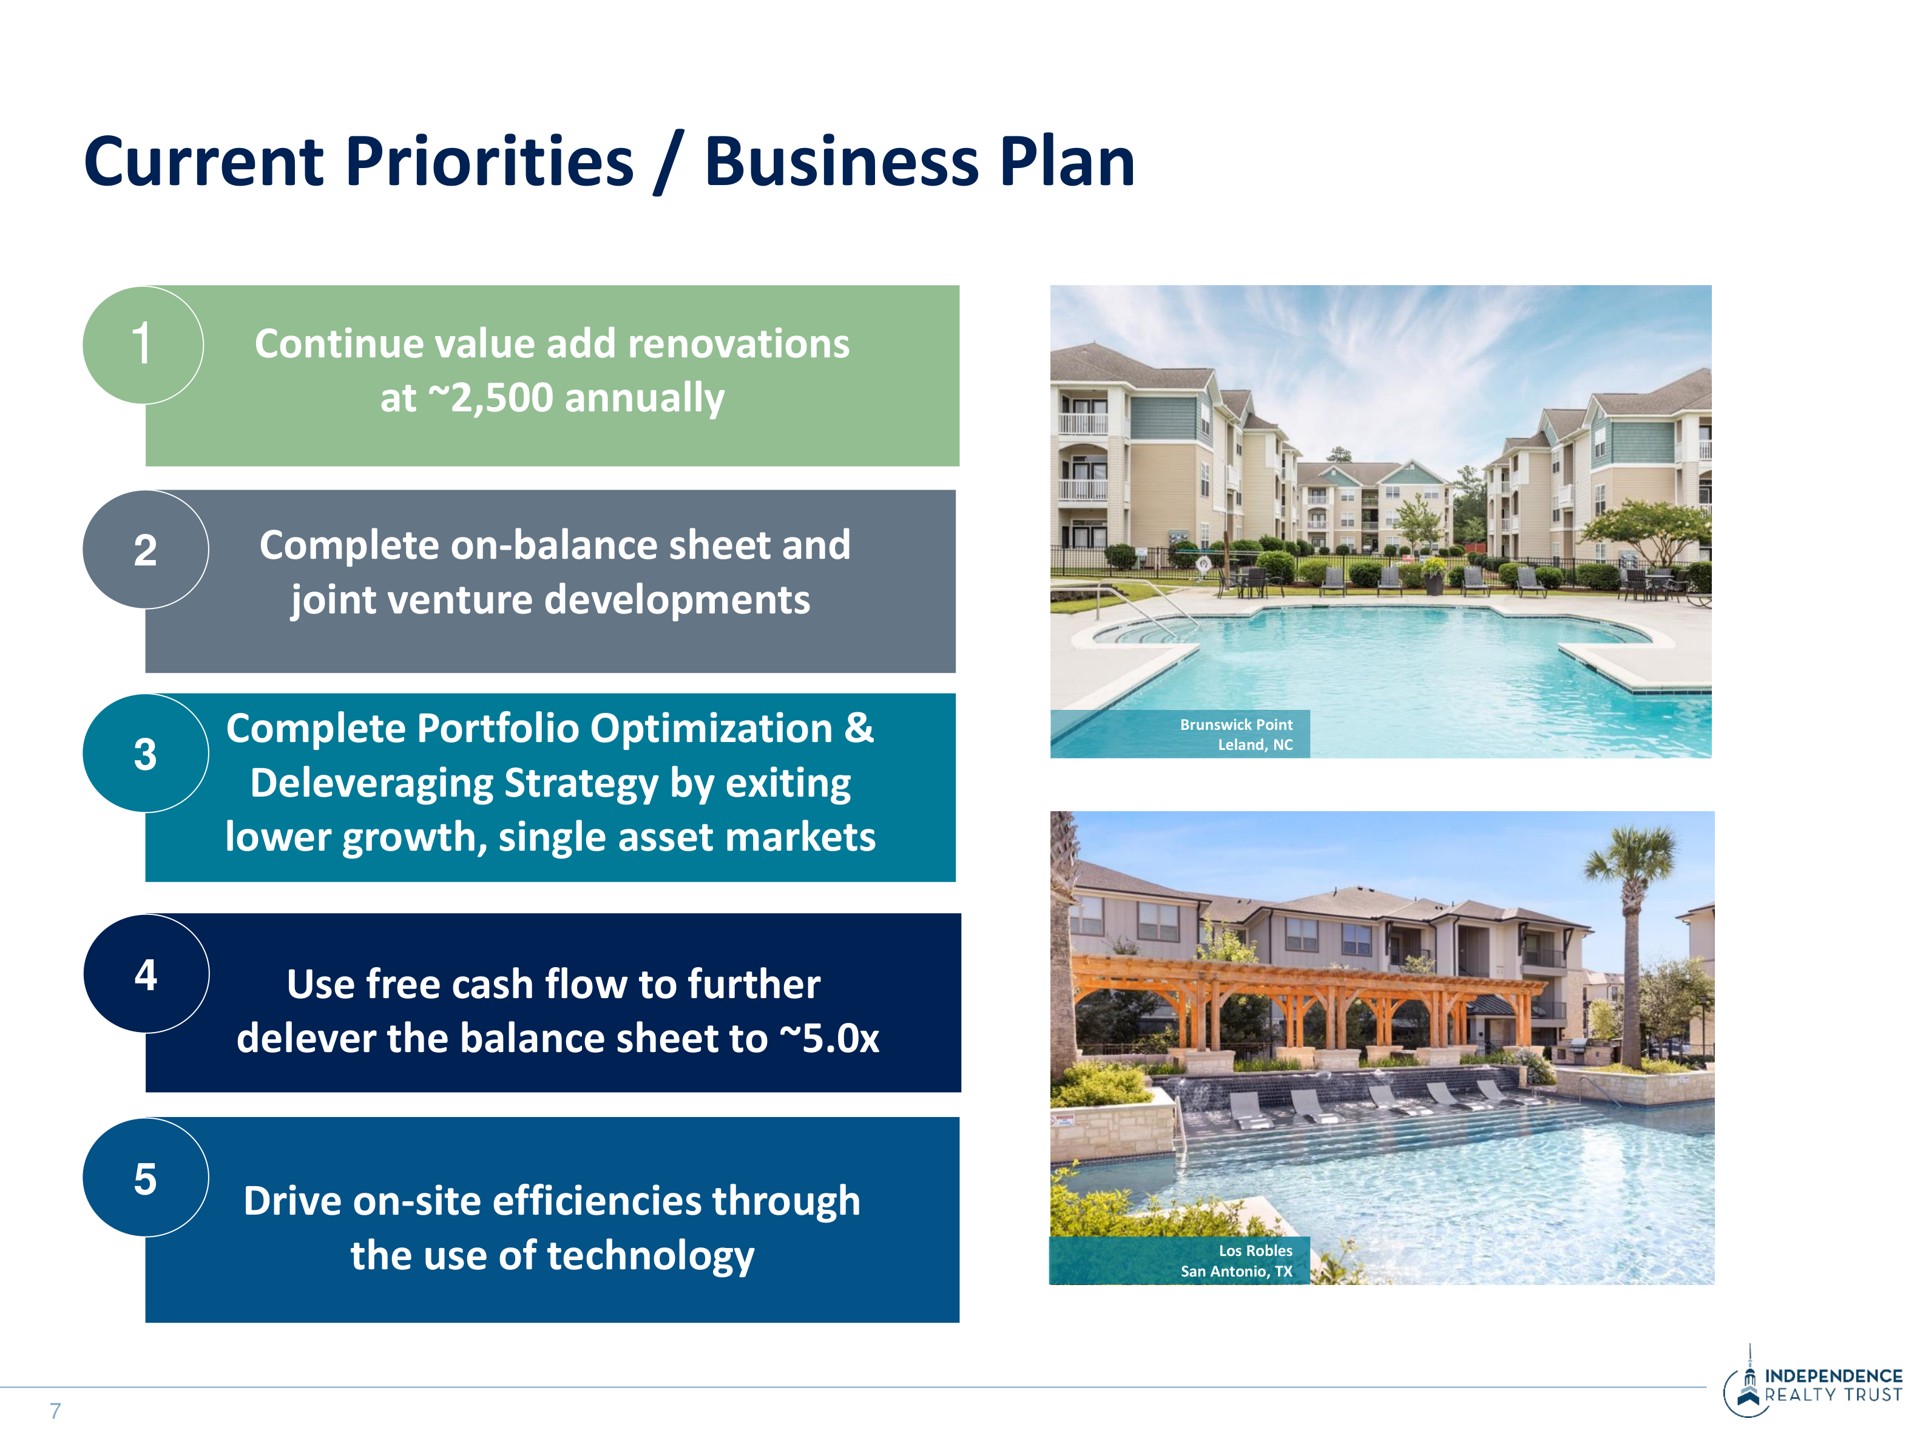 current priorities business plan continue value add renovations at annually complete on balance sheet and joint venture developments complete portfolio optimization strategy by exiting lower growth single asset markets use free cash flow to further the balance sheet to drive on site efficiencies through the use of technology pial a ore | Independence Realty Trust